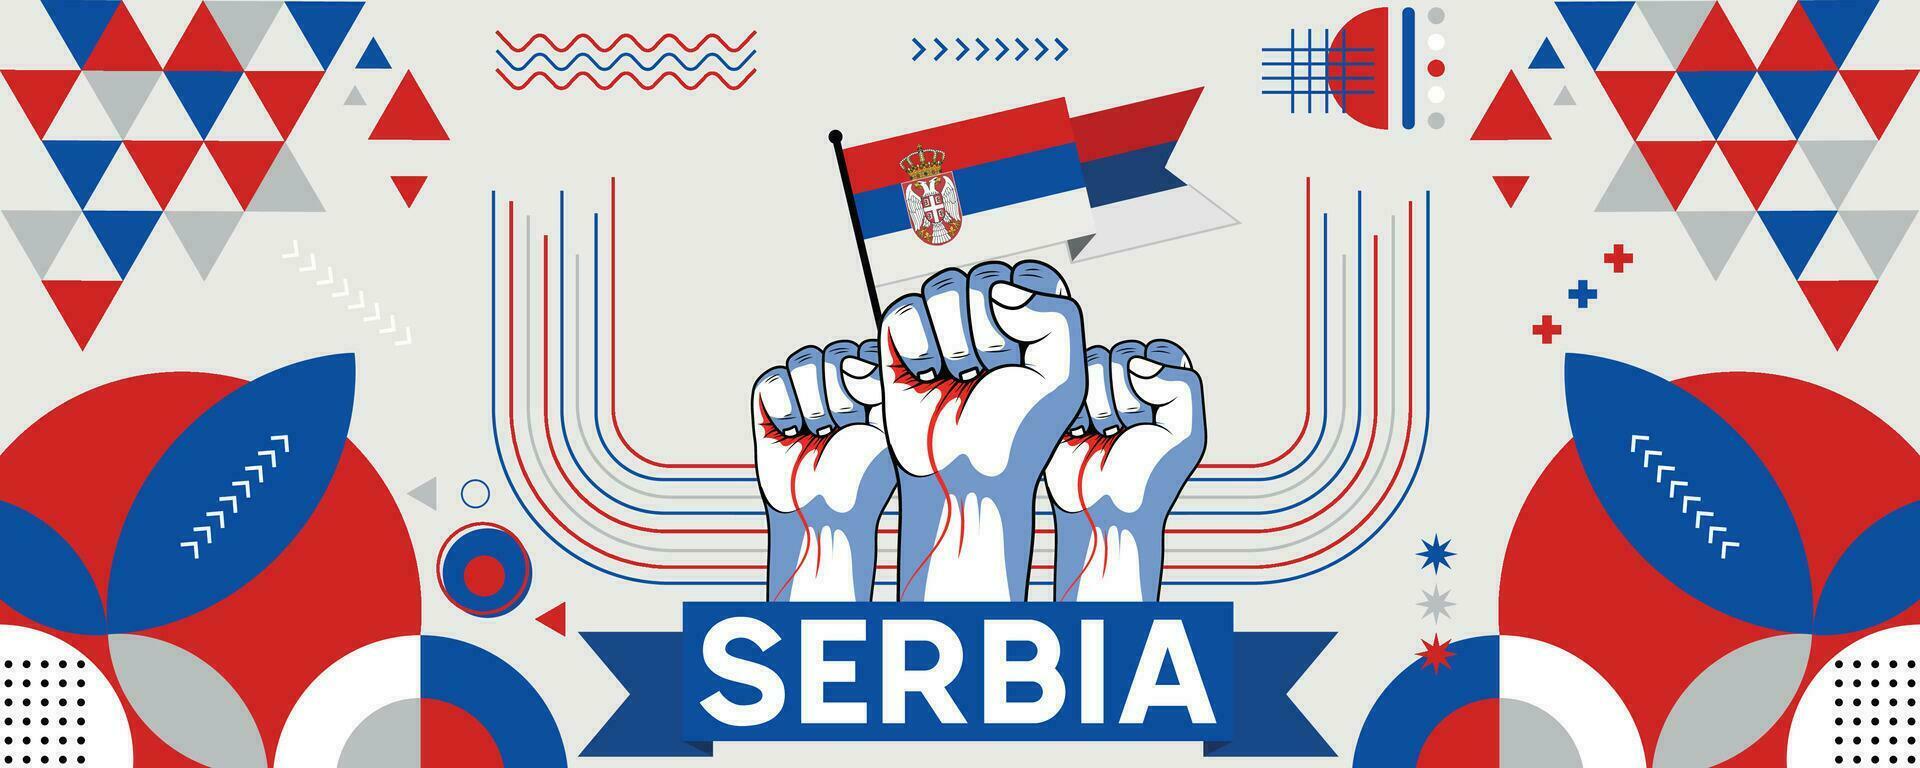 Serbia national or independence day banner design for country celebration. Flag of Serbia with raised fists. Modern retro design with abstract geometric icons. Vector illustration.